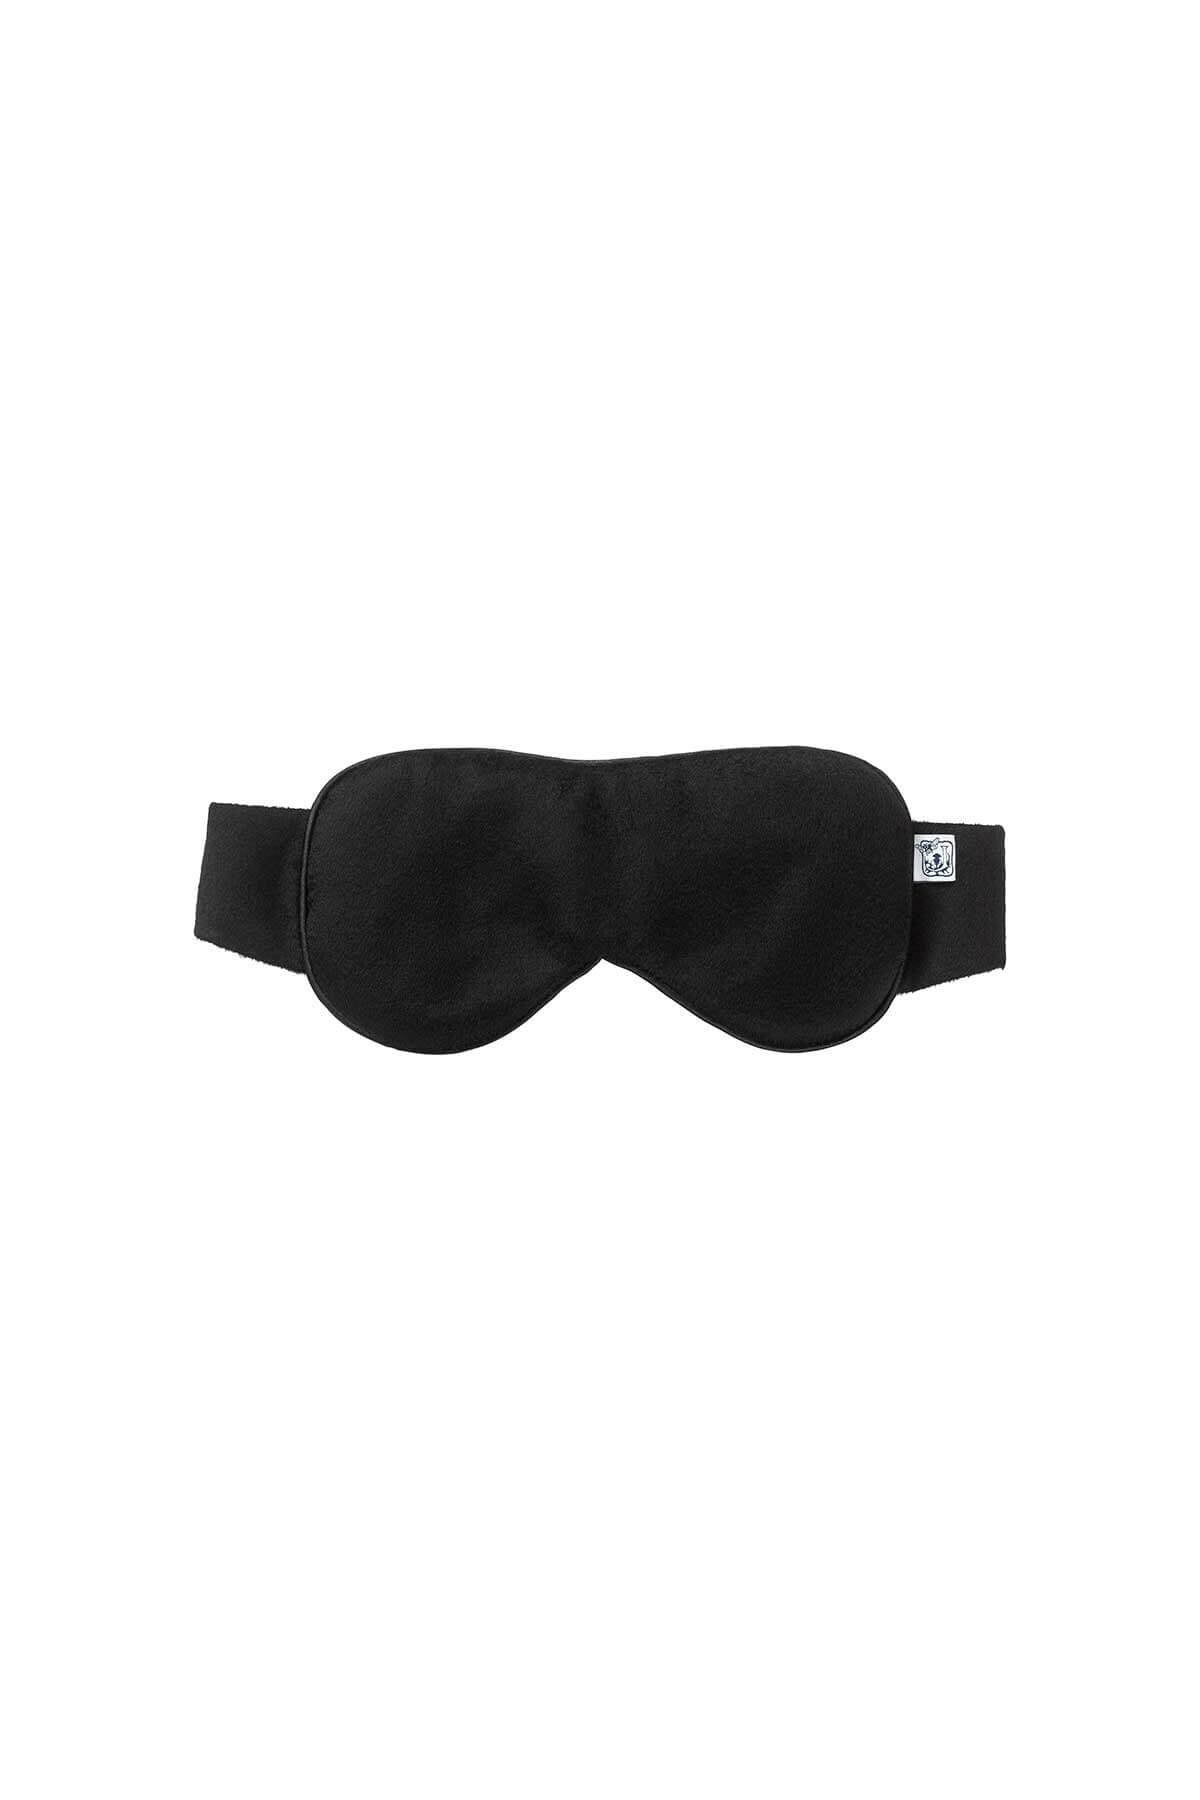 Johnstons of Elgin  Luxury Cashmere Travel Eye Mask in Black on a white background PA000094RU6432ONE